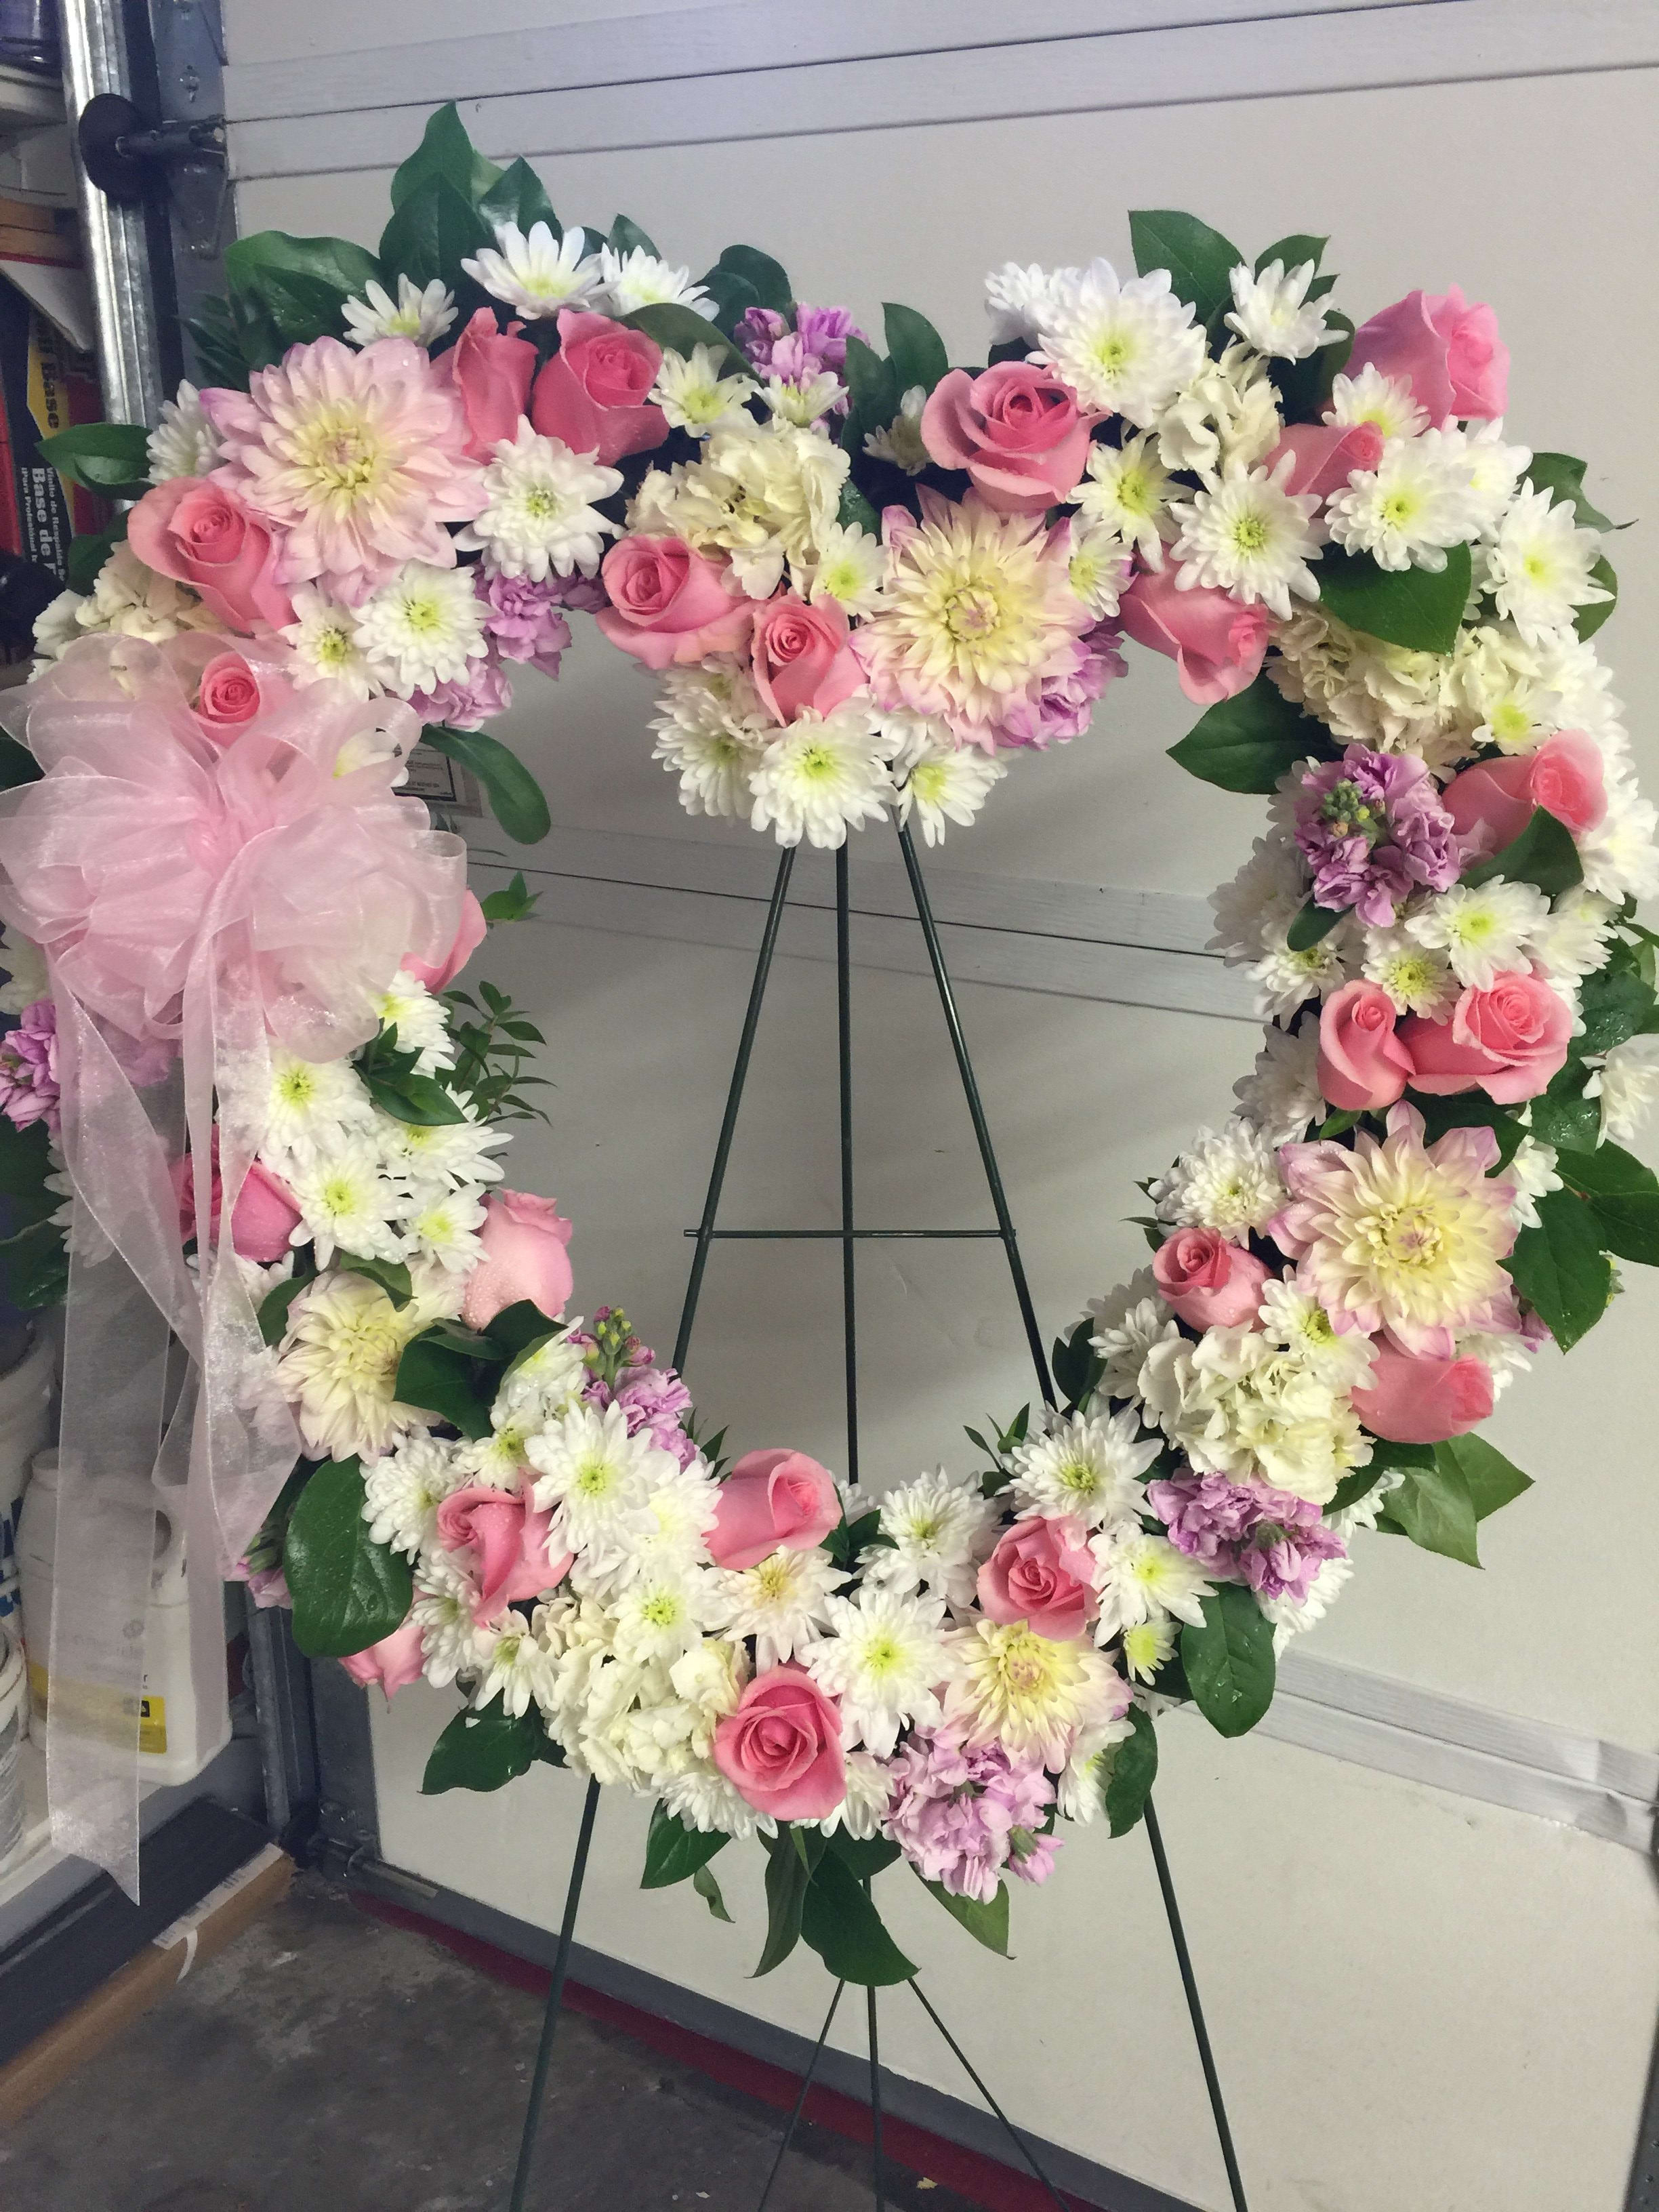 Love Always - To express your love and sympathy-- A heart-shaped easel spray featuring two dozen pink roses mixed with dahlias, mums, and lemon leaf.